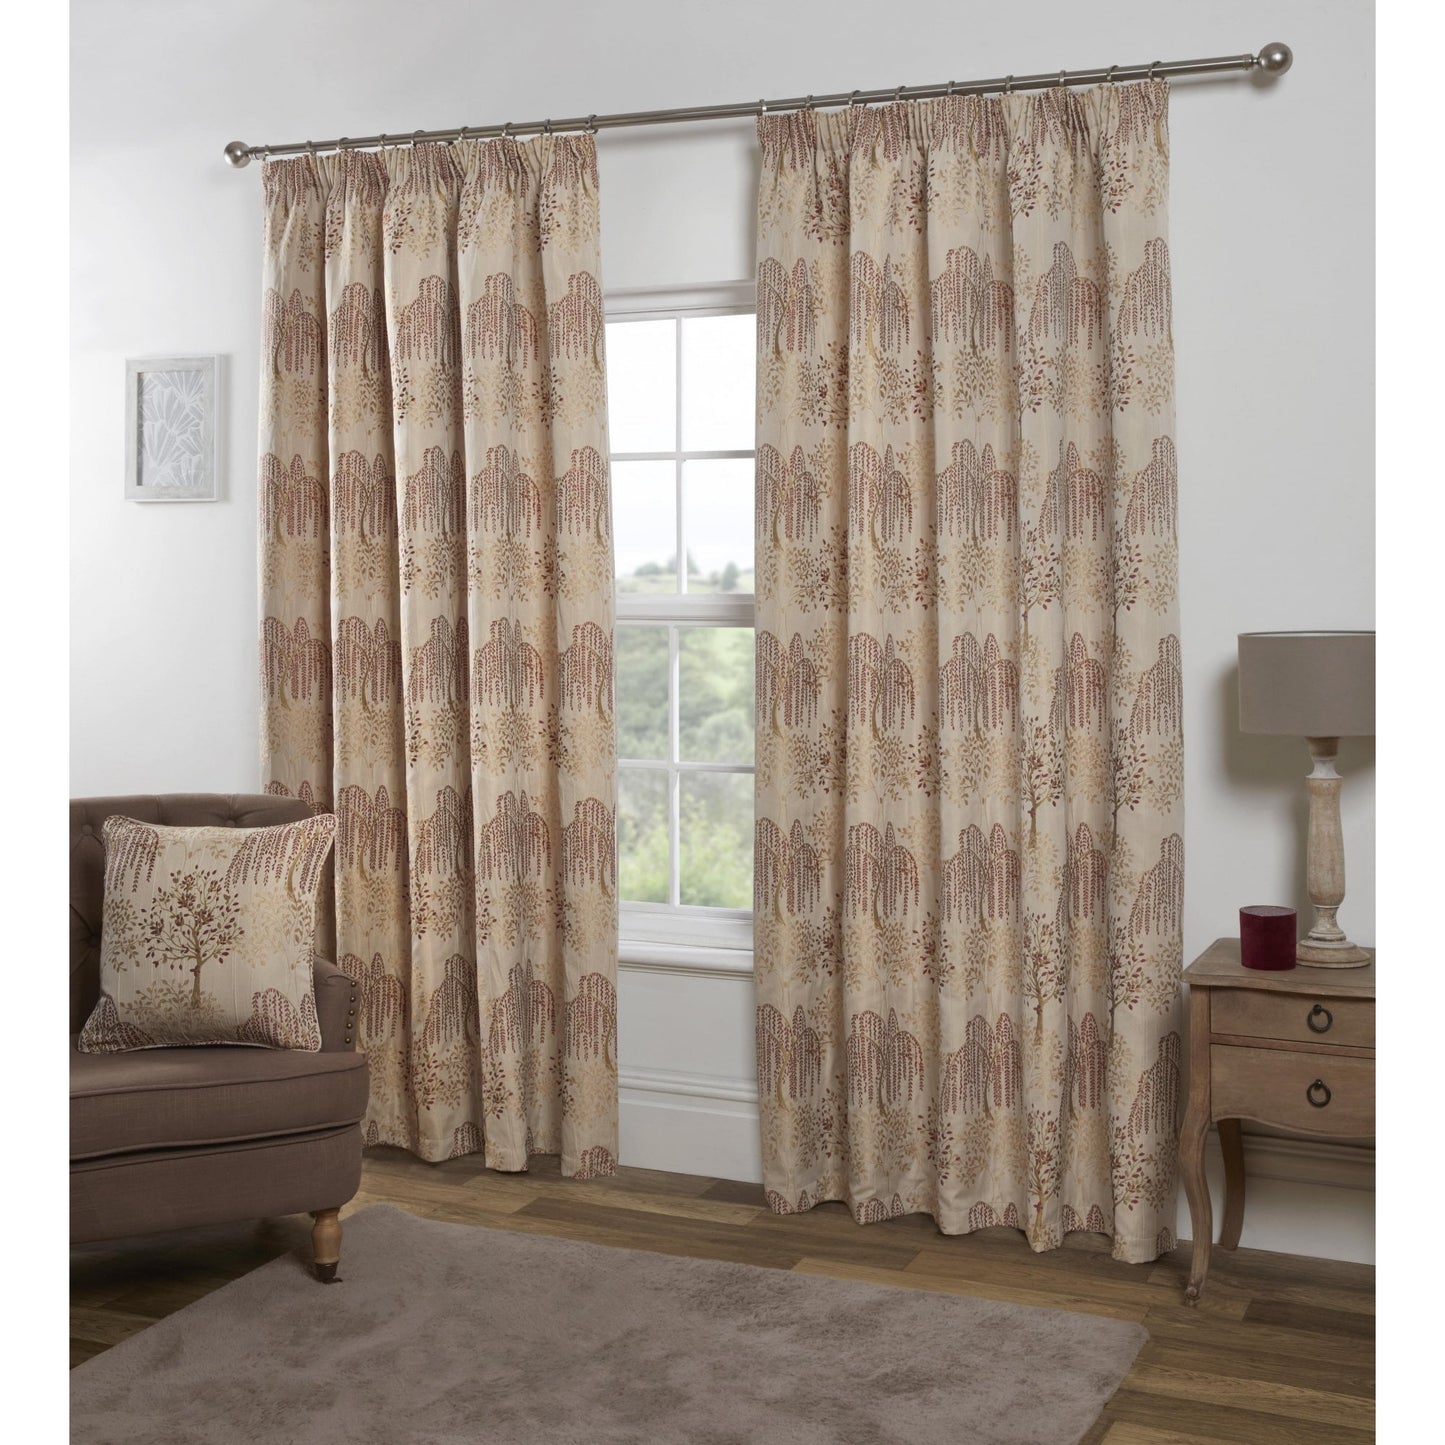 Orchard Tape Patterned Curtains - Chintz